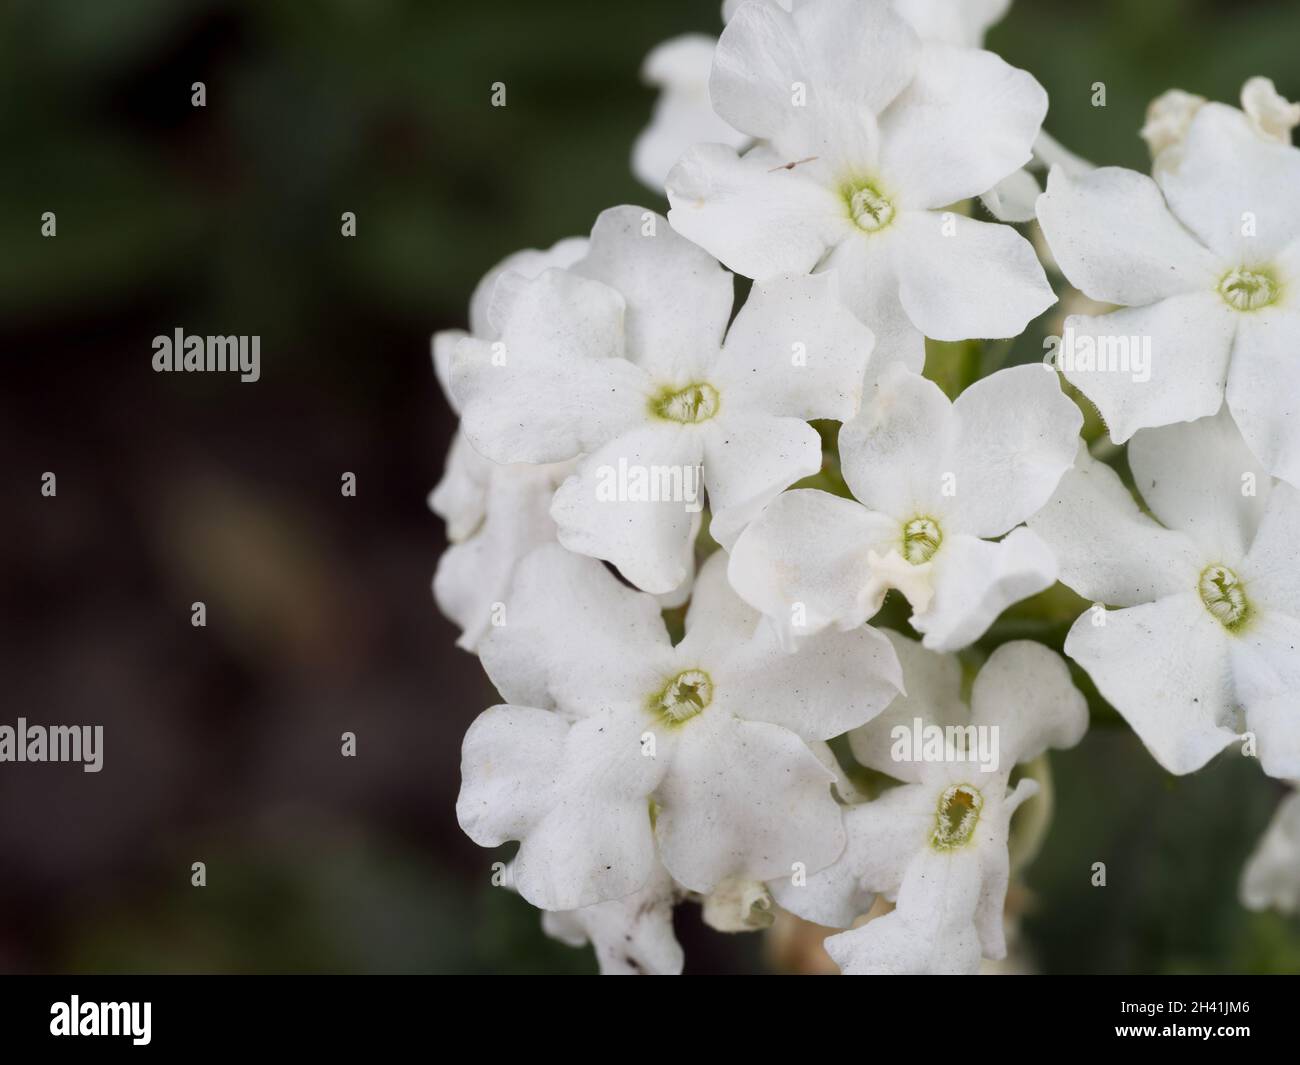 Inflorescence of white phlox on a dark blurred background. White flowers close-up. Stock Photo